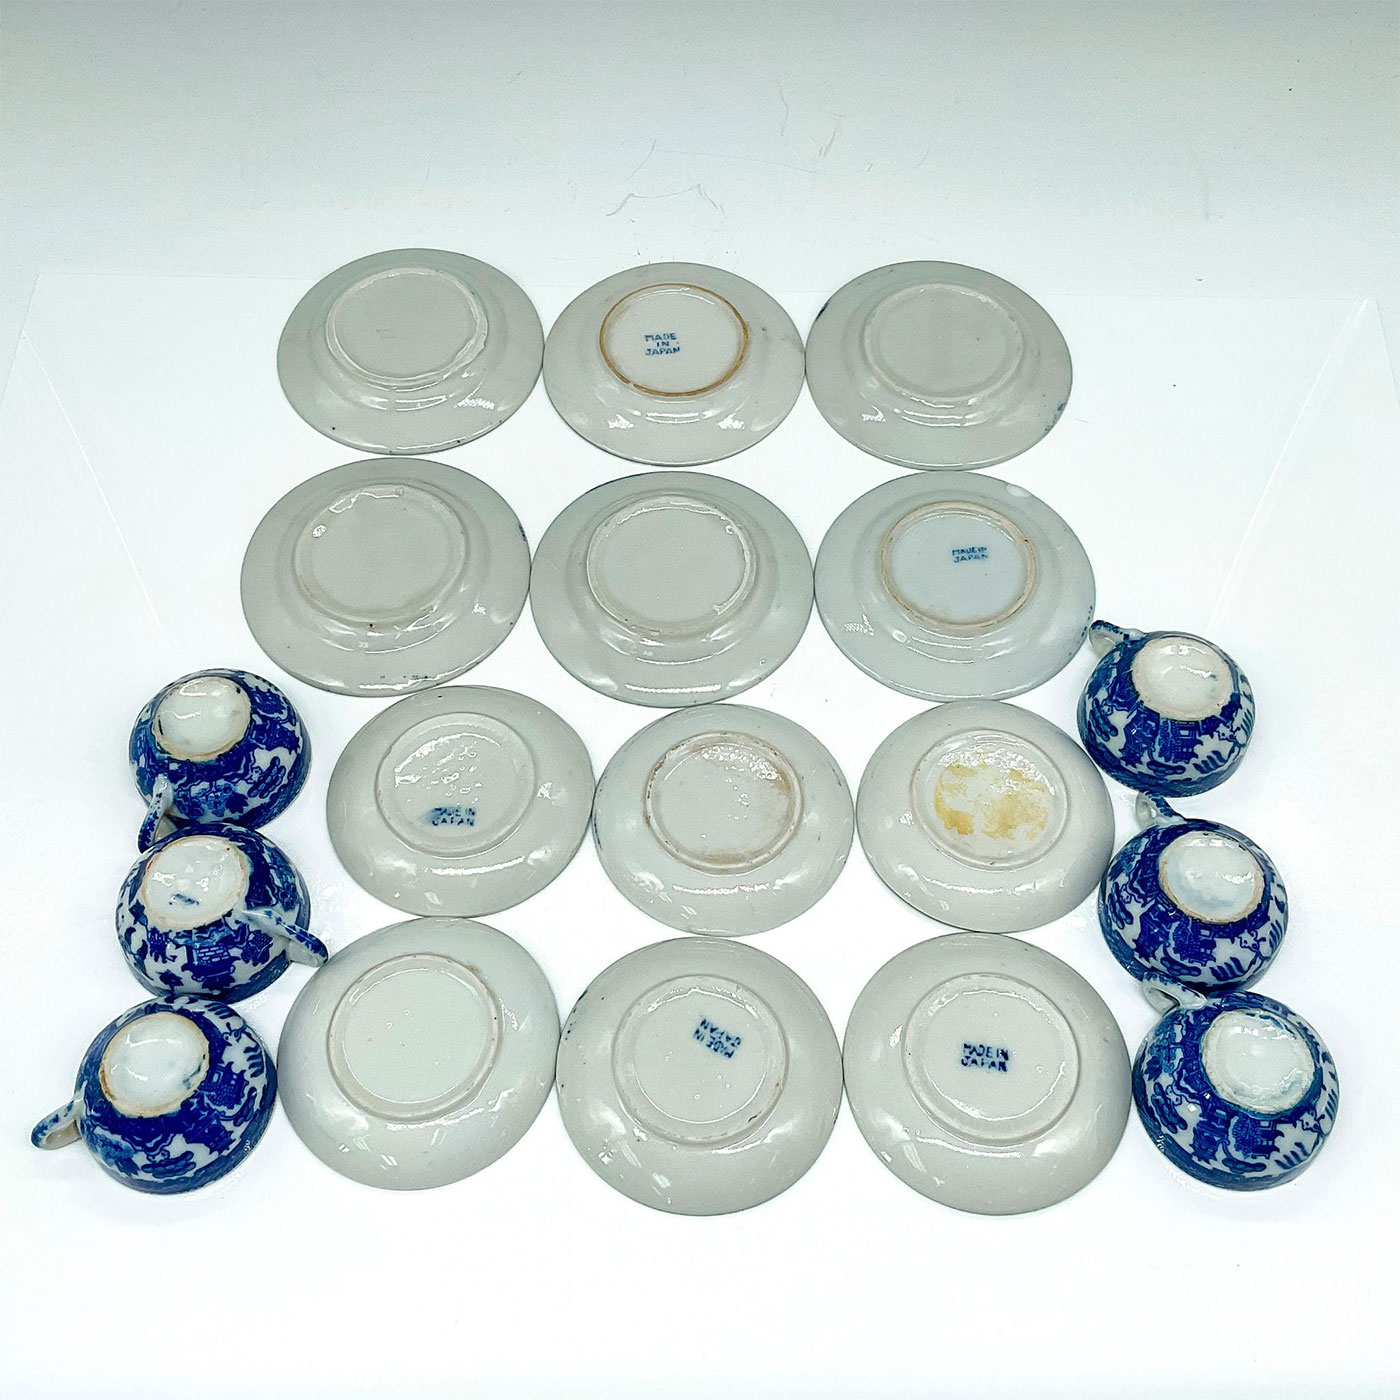 18pc Blue Willow Child's Tea Set Cups and Saucers - Image 3 of 3